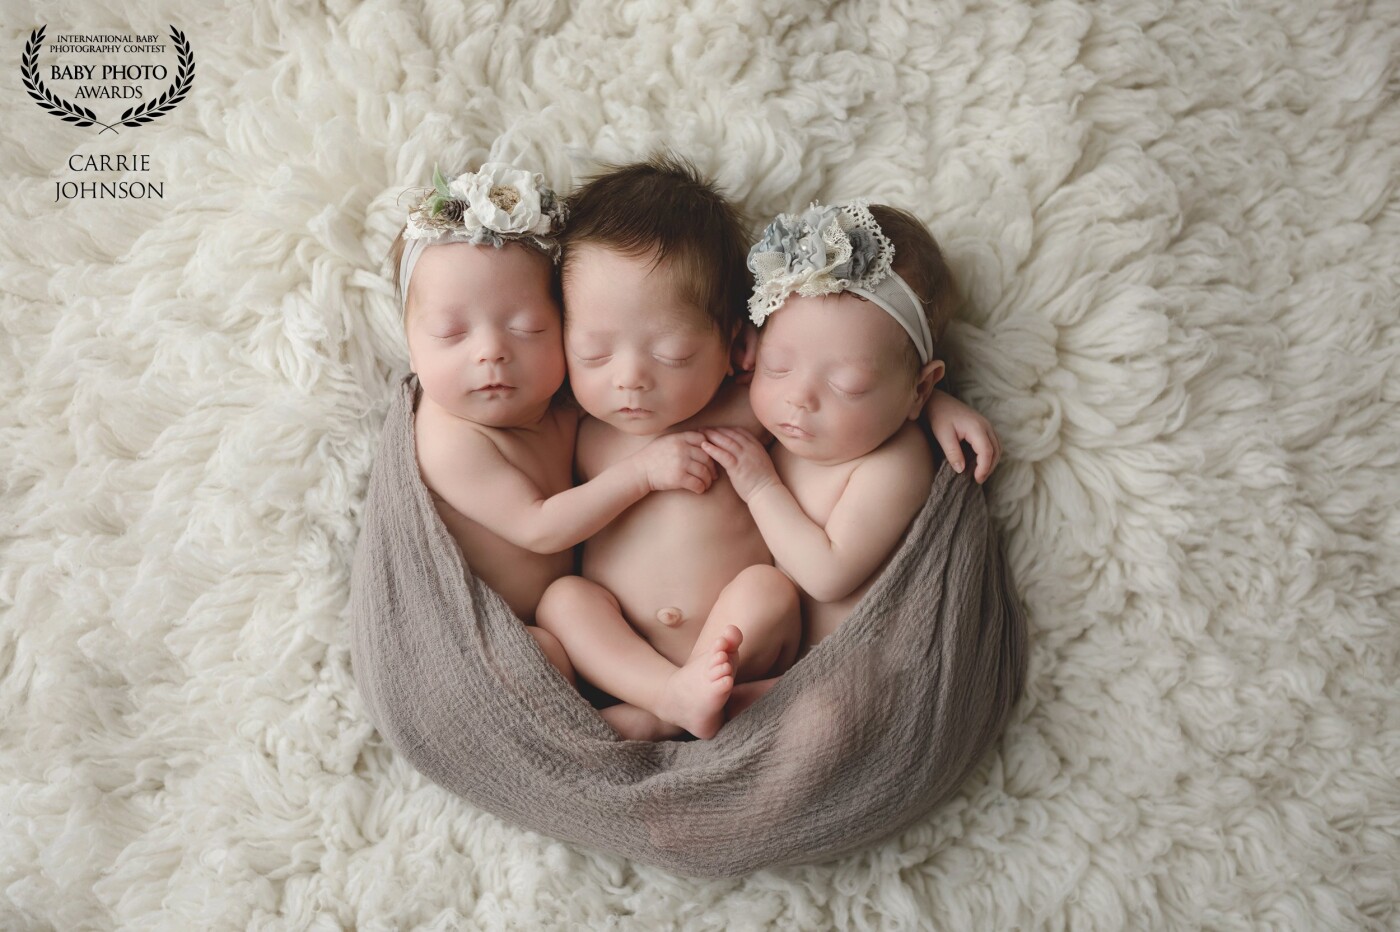 These 3 sweet babies are spontaneous triplets! Two identical girls and a boy. They were born at 29 weeks, weighing just over 2 pounds each. These photos were taken when they were exactly 2 months old, shortly after they came home from their stay in the NICU.